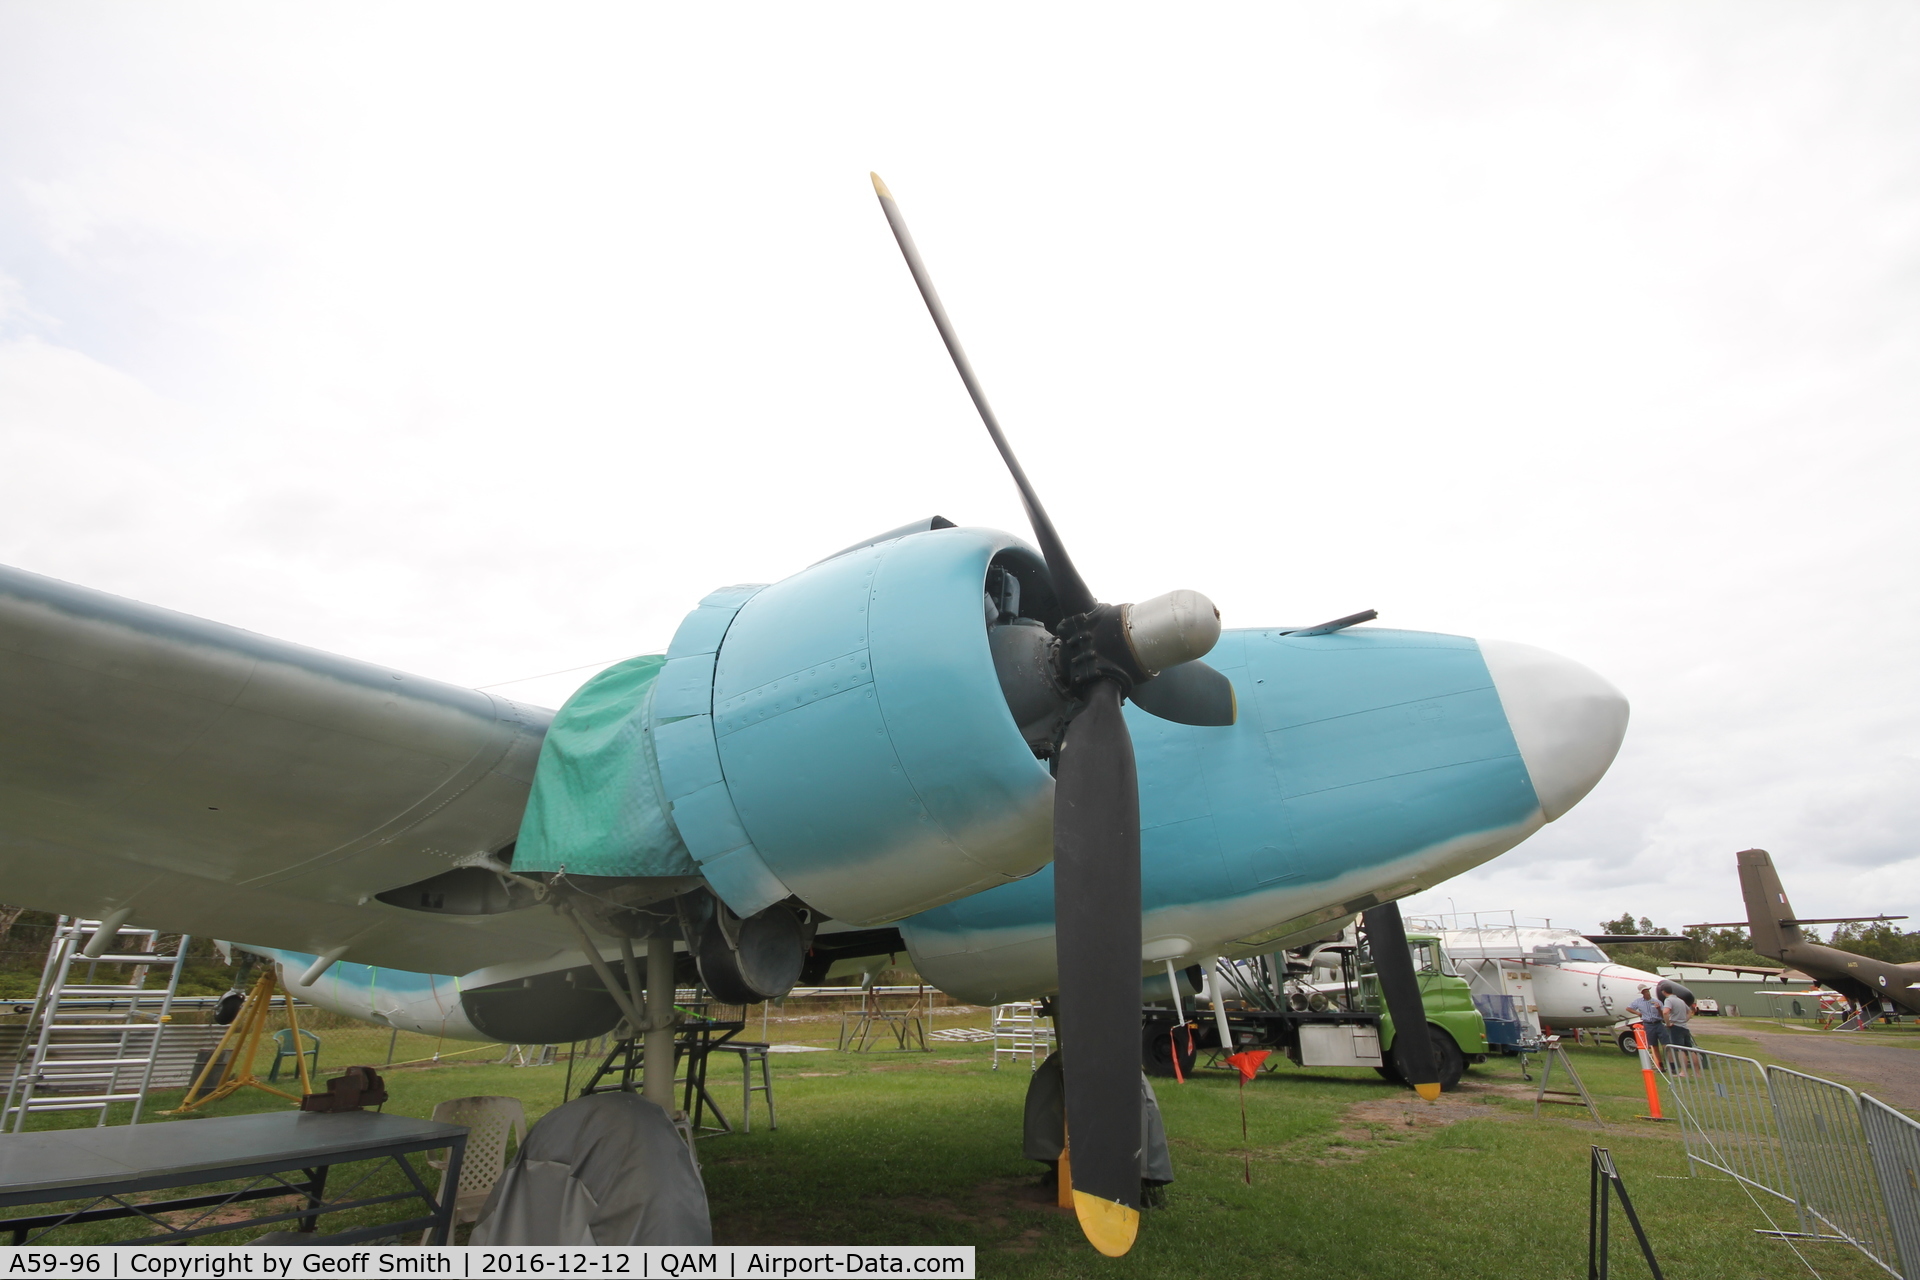 A59-96, 1944 Lockheed PV-1 Ventura (237-27-01) C/N 237-6371, Ventura PV-1 A59-96 on display at Queensland Air Museum, restoration now virtually complete.
QAM opens to the pubic every day 10am - 4pm.
Engines Alive Day January 7. See web site www.qam.com.au